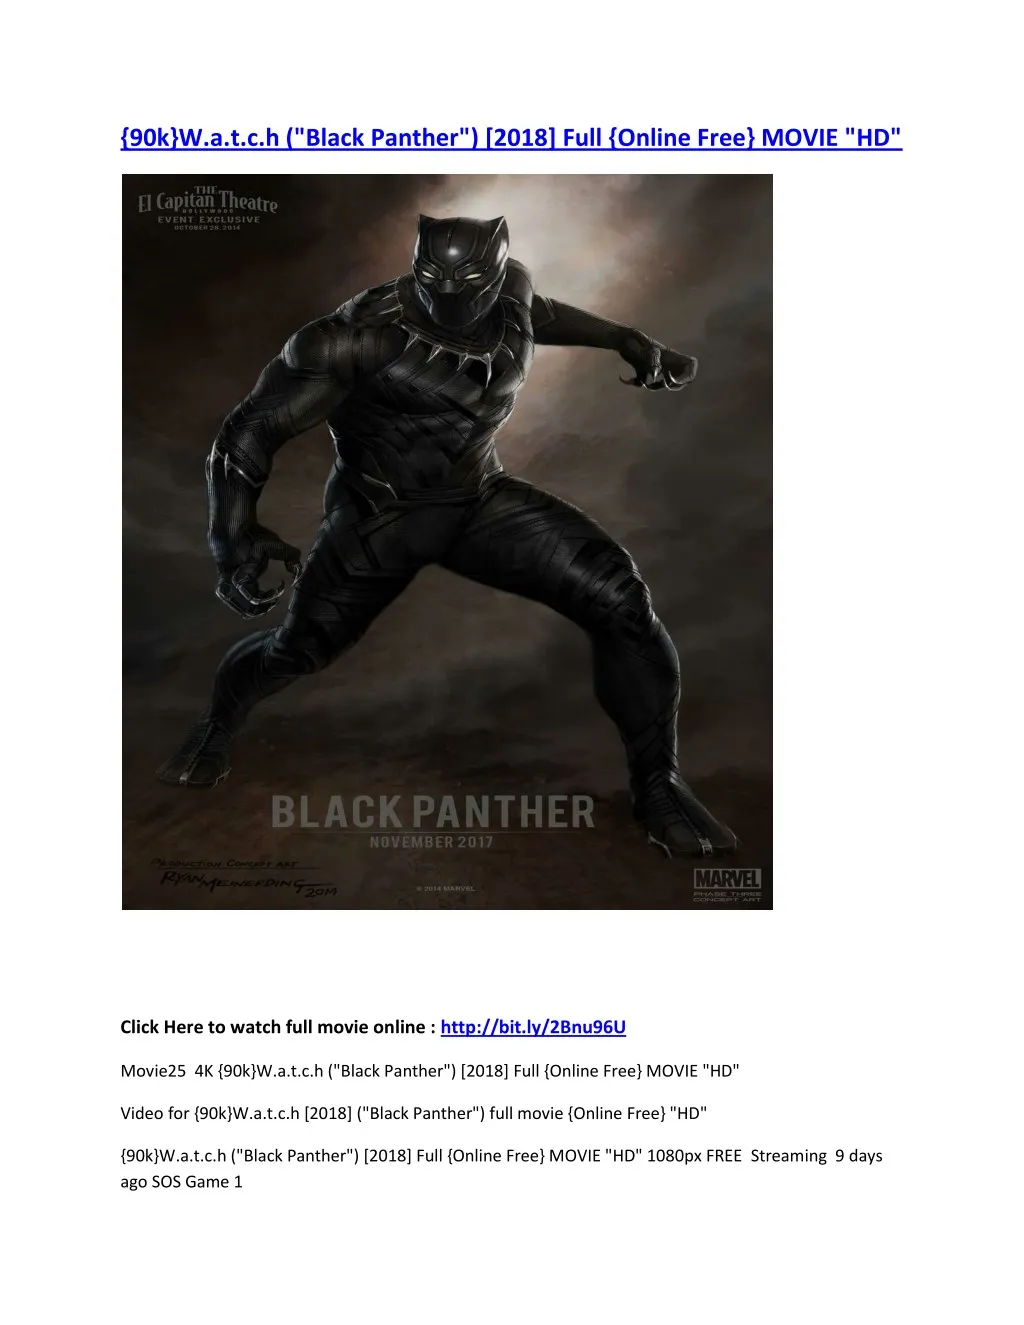 90k w a t c h black panther 2018 full online free